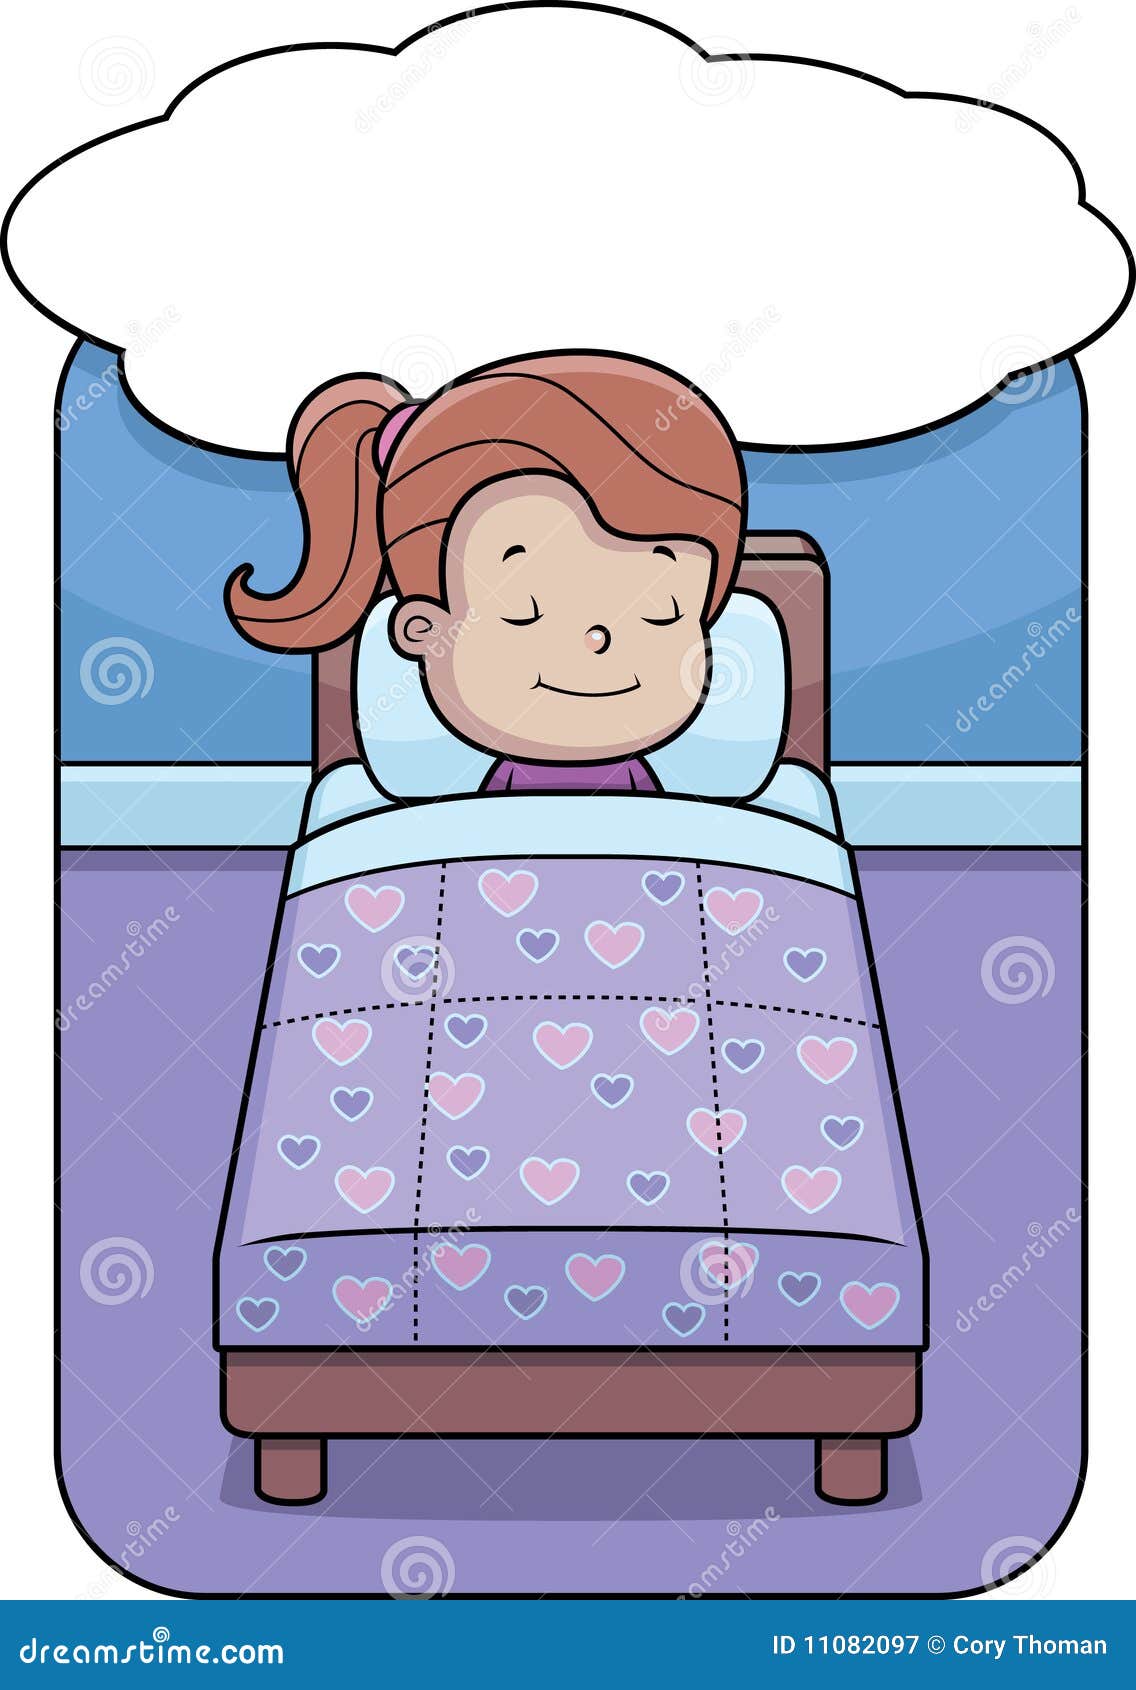 cartoon girl in bed sleeping and dreaming